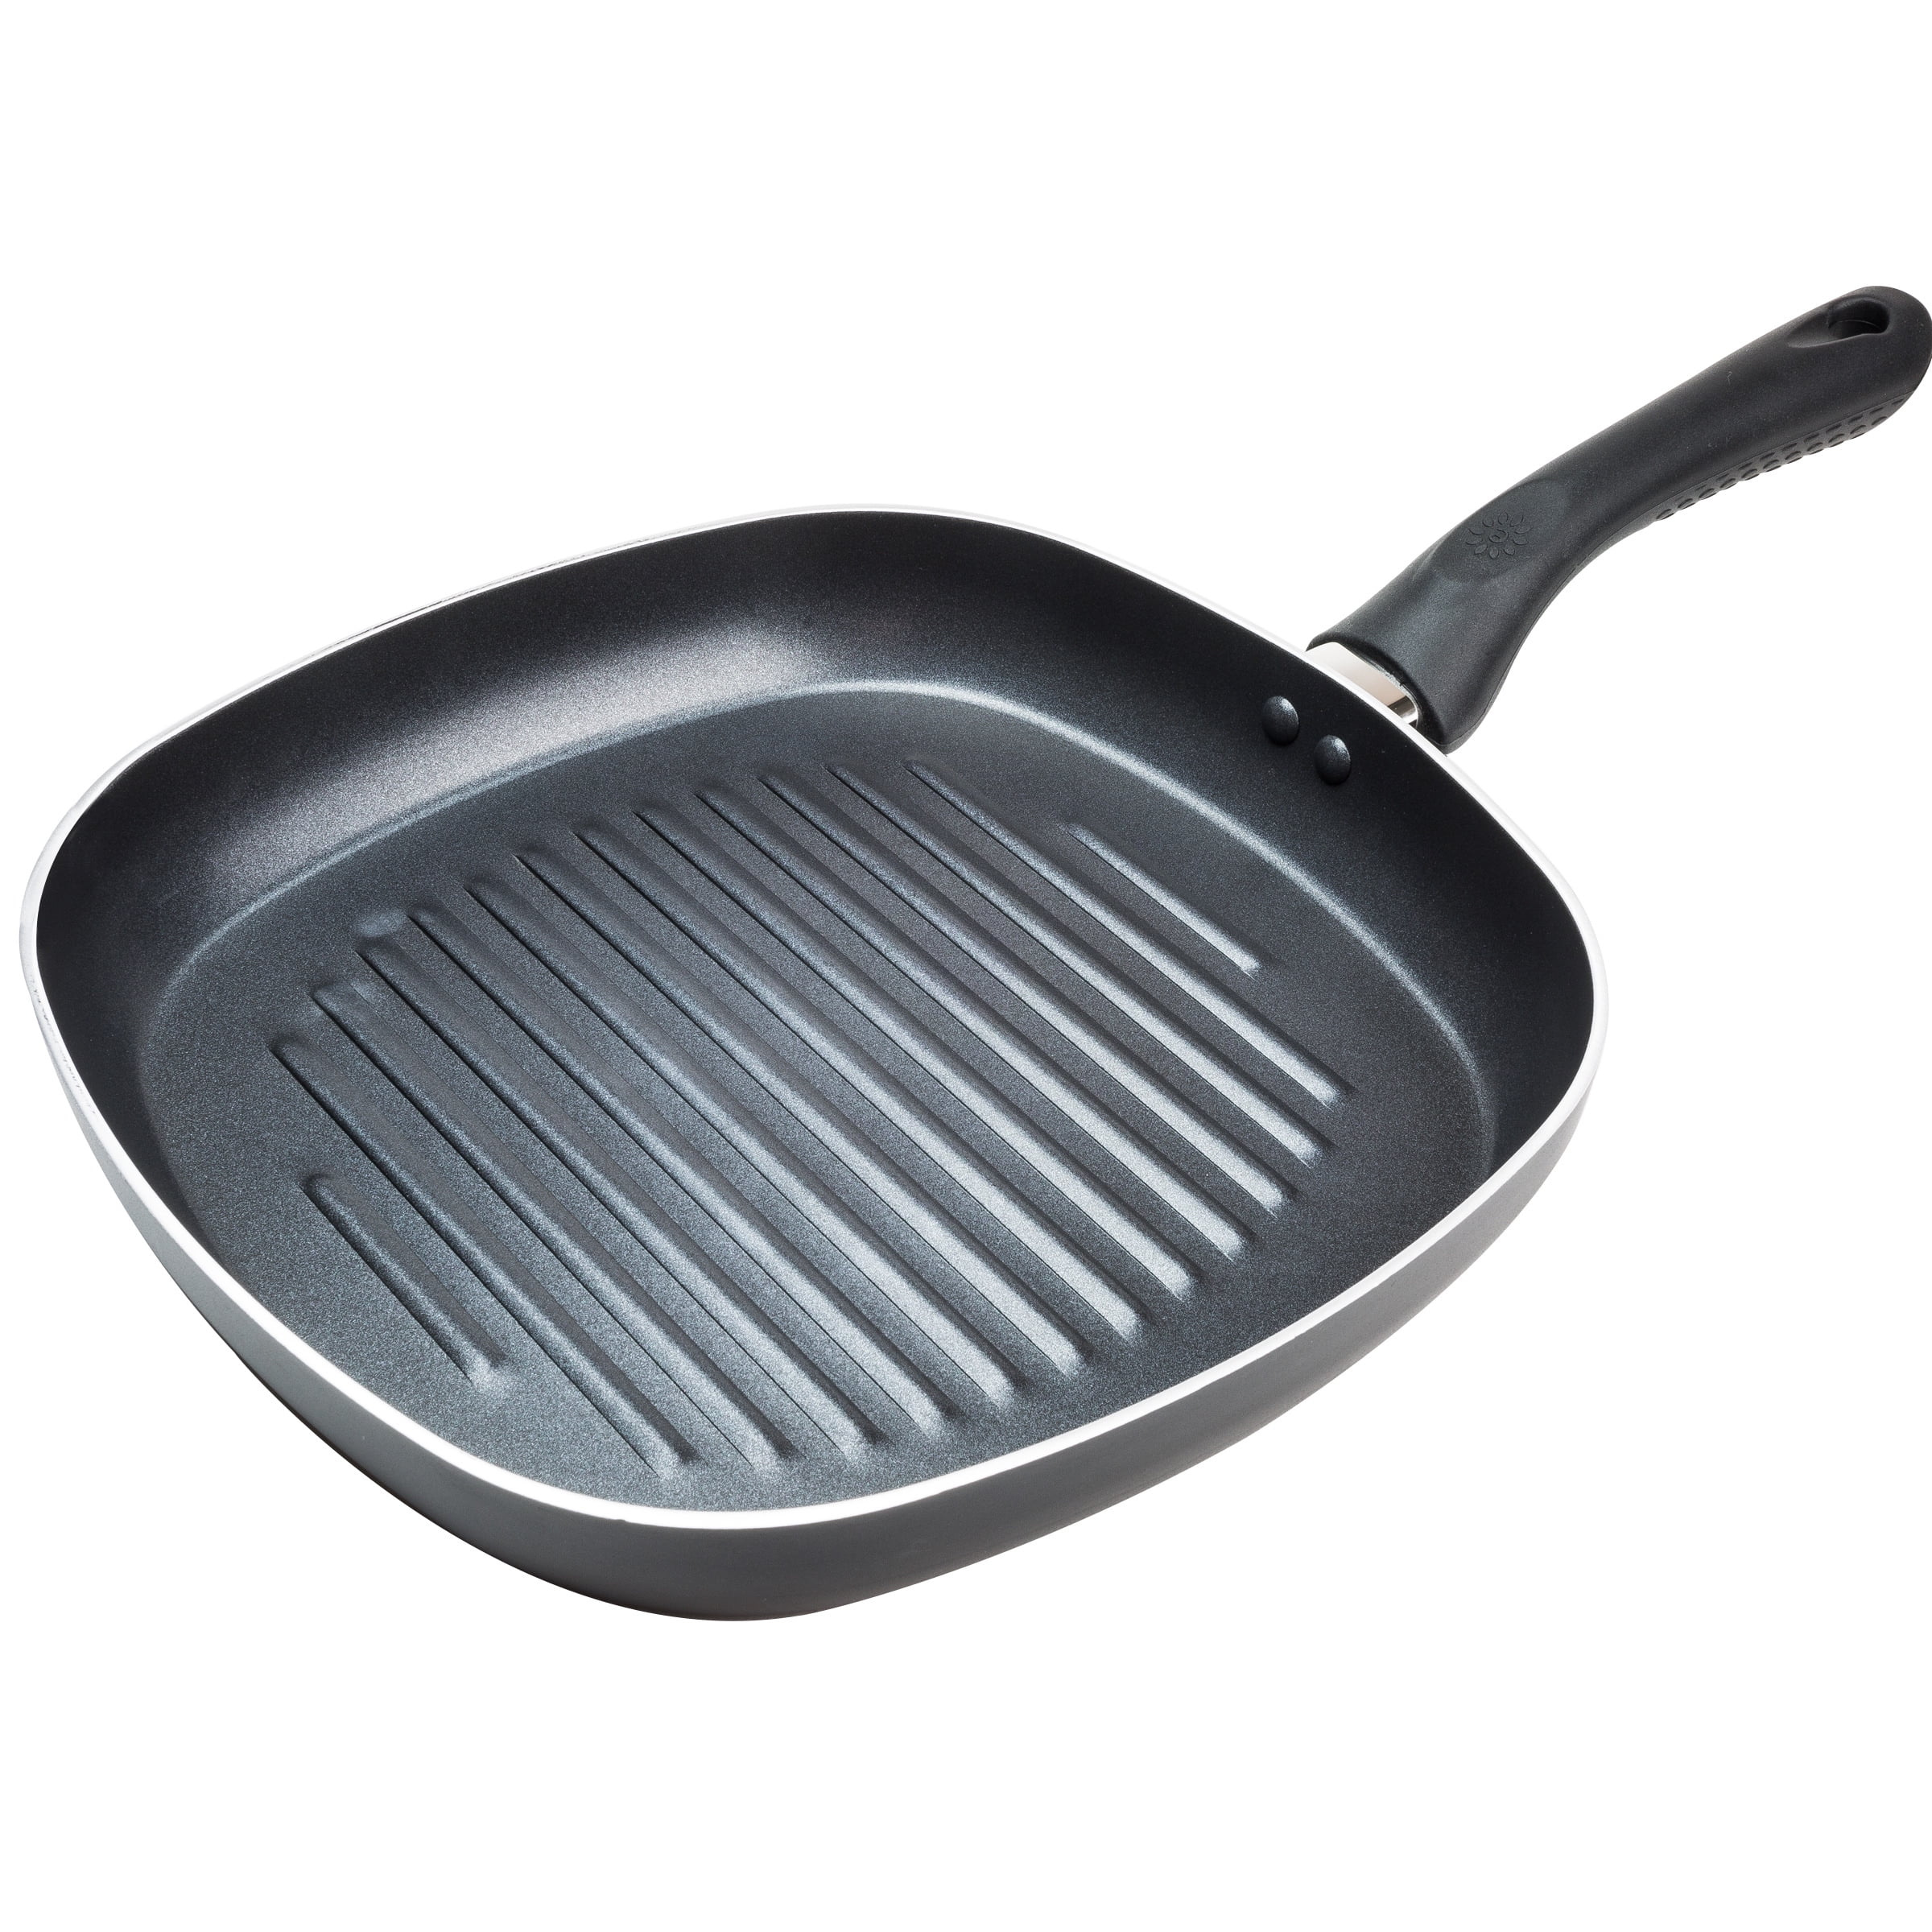 Ecolution Evolve Grande 12.5 Inch Non-Stick Extra Large Pan, Dishwasher  Safe, Scratch Resistant, With Easy Food Release Interior, Silicone Handle  and Even Heating Base, Black 